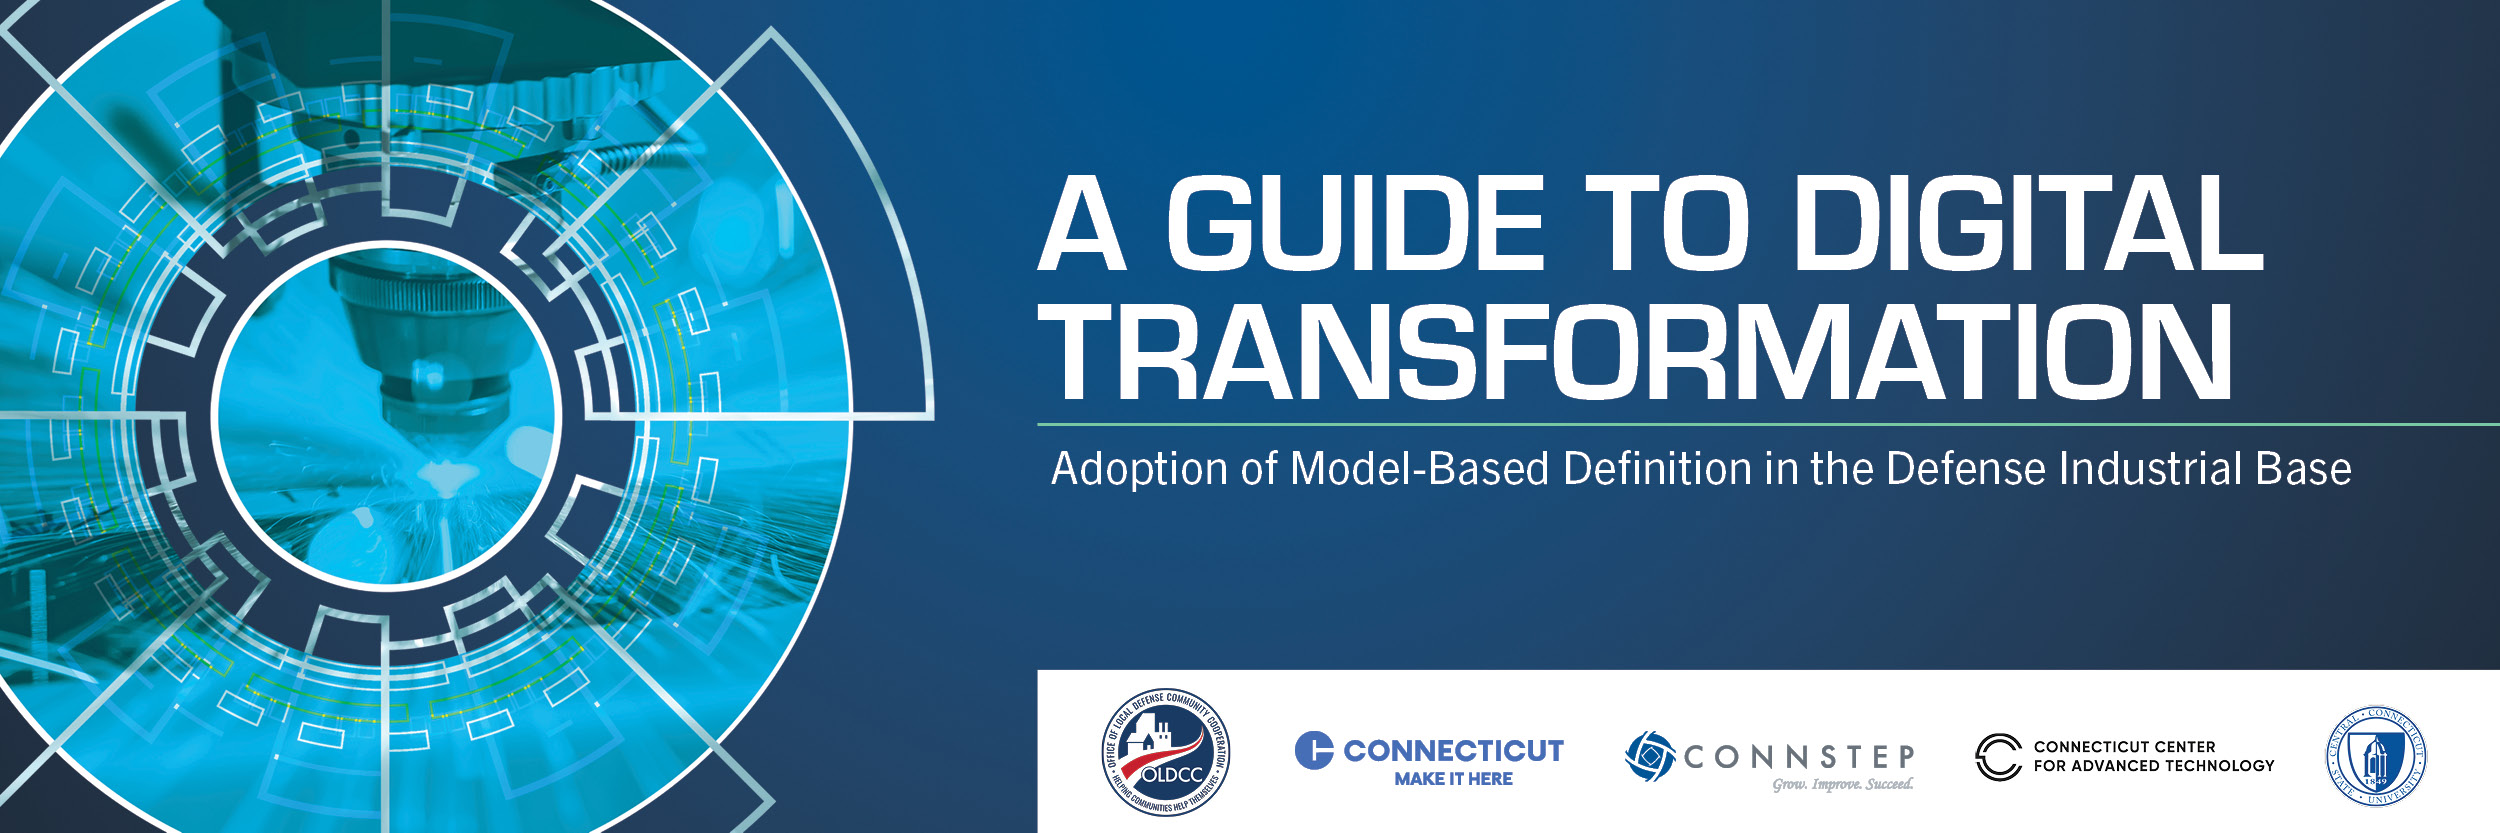 A Guide to Digital Transformation Hosted by CT State Community College Gateway